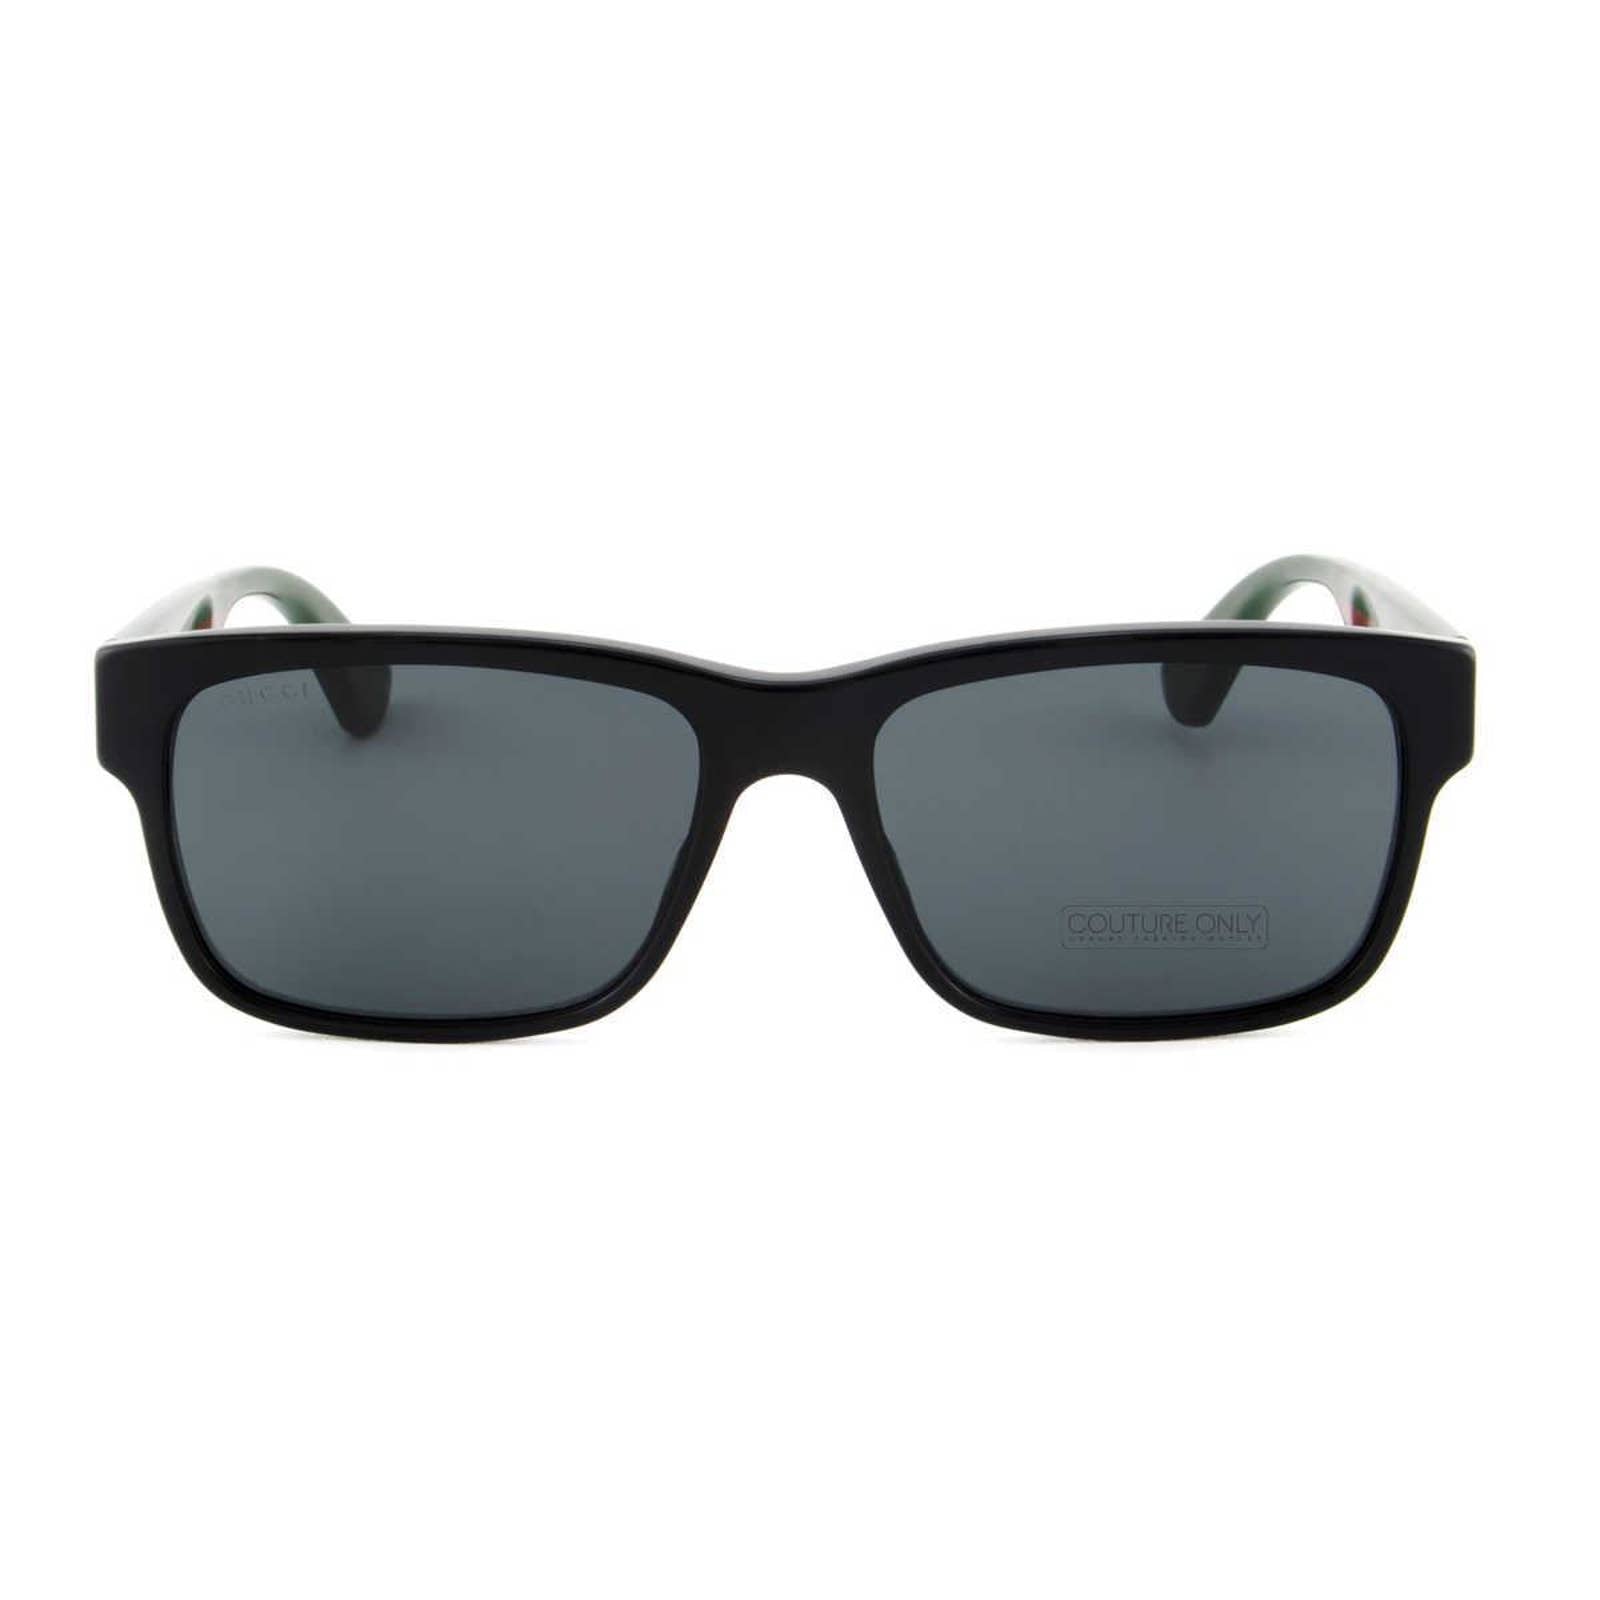 Gucci Men's Square Sunglasses: Bold Elegance with Iconic Detailing